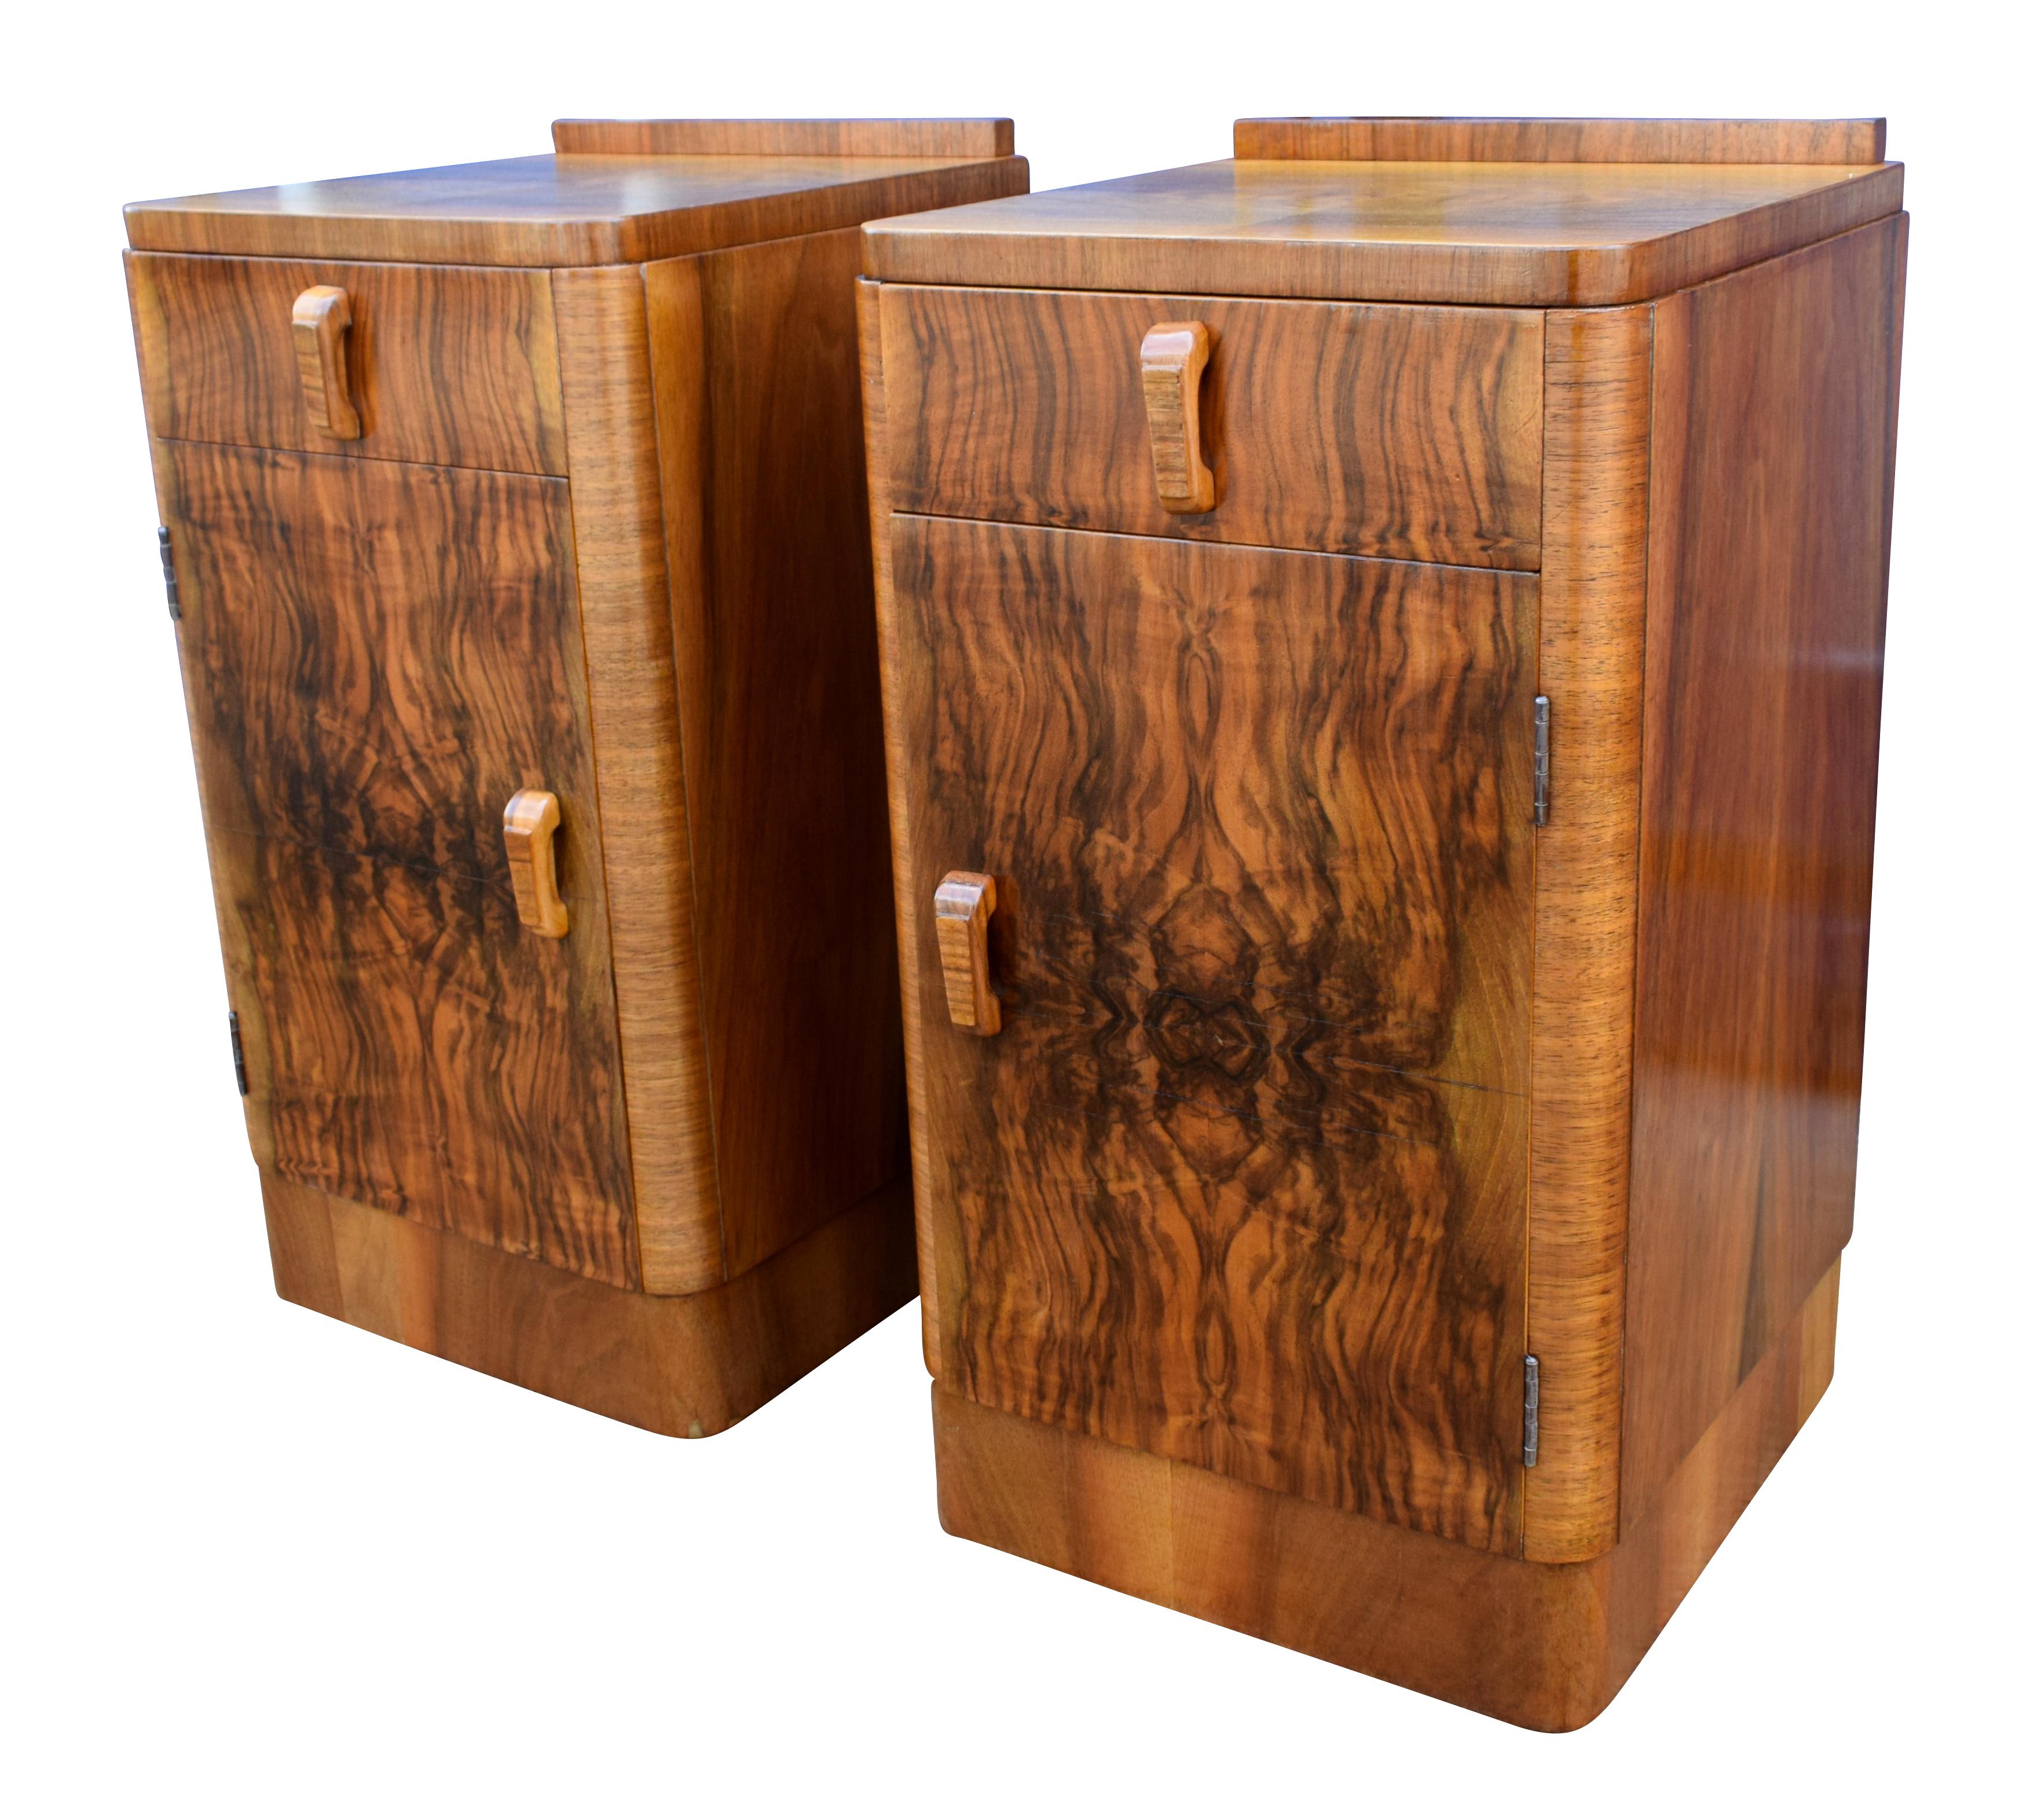 20th Century English Matching Pair of Art Deco Walnut Bedside Cabinet Tables, circa 1935